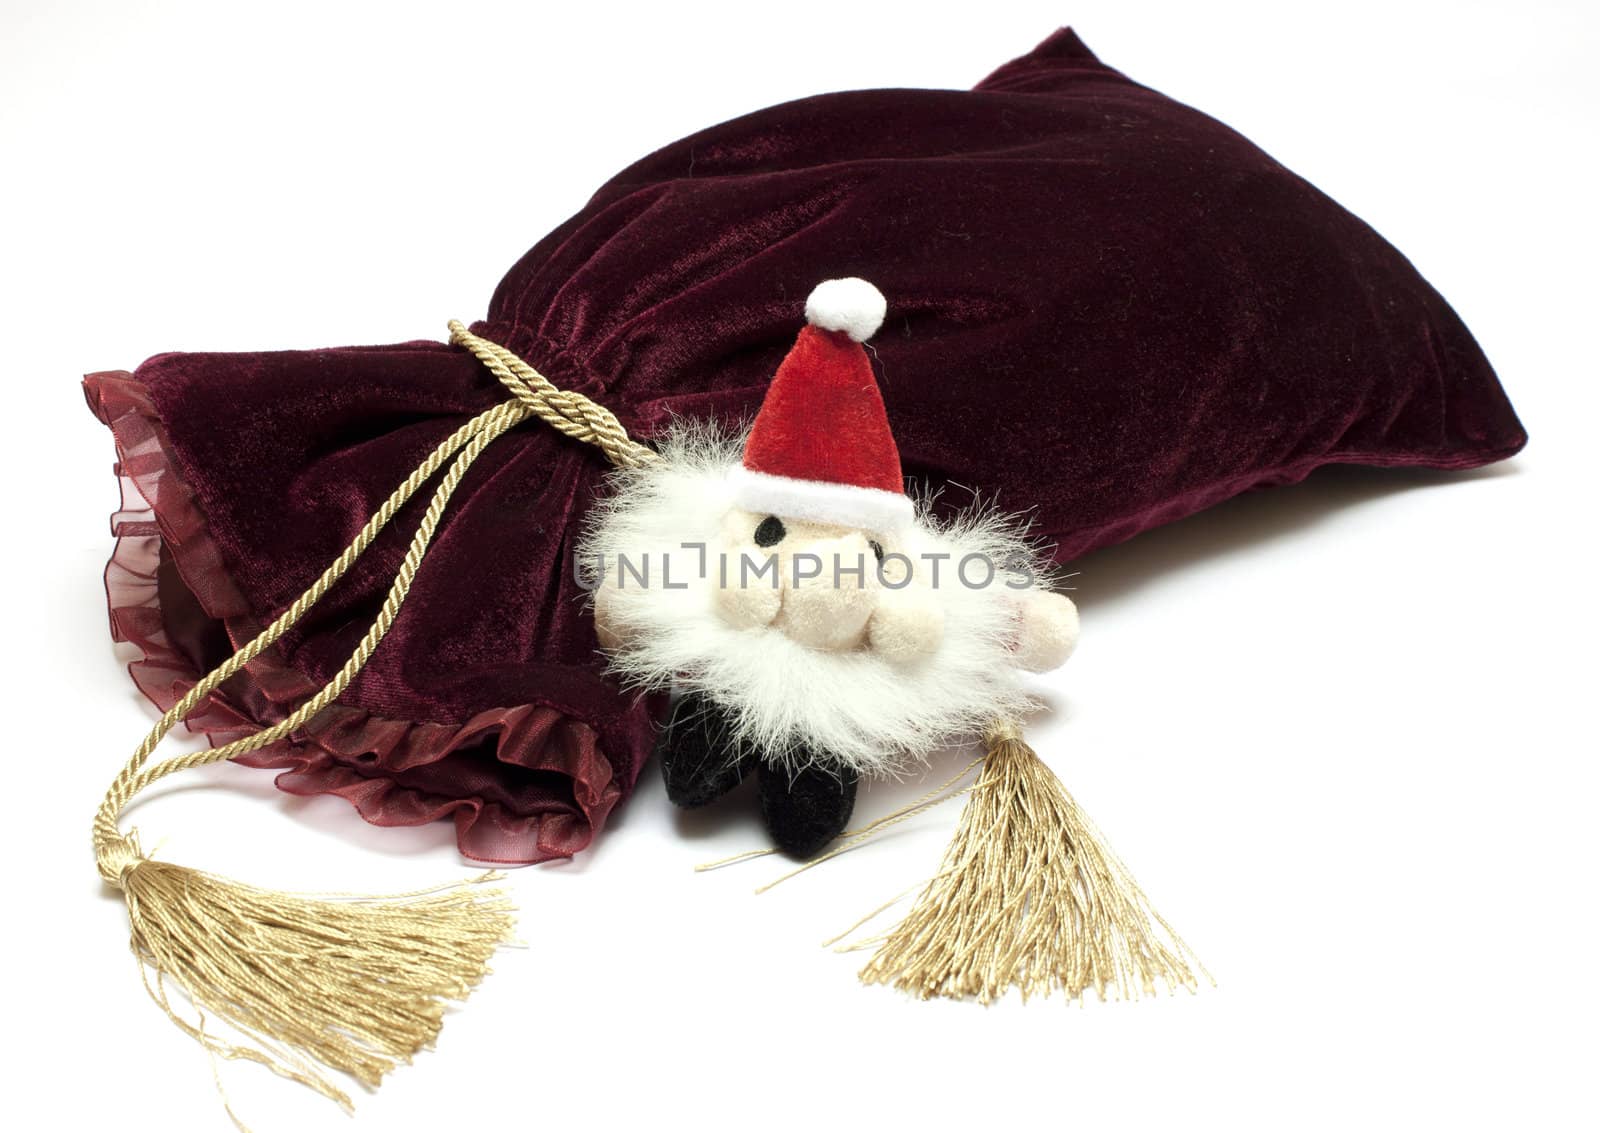 Santa Claus toy and fancy luxury gift bag over white background 